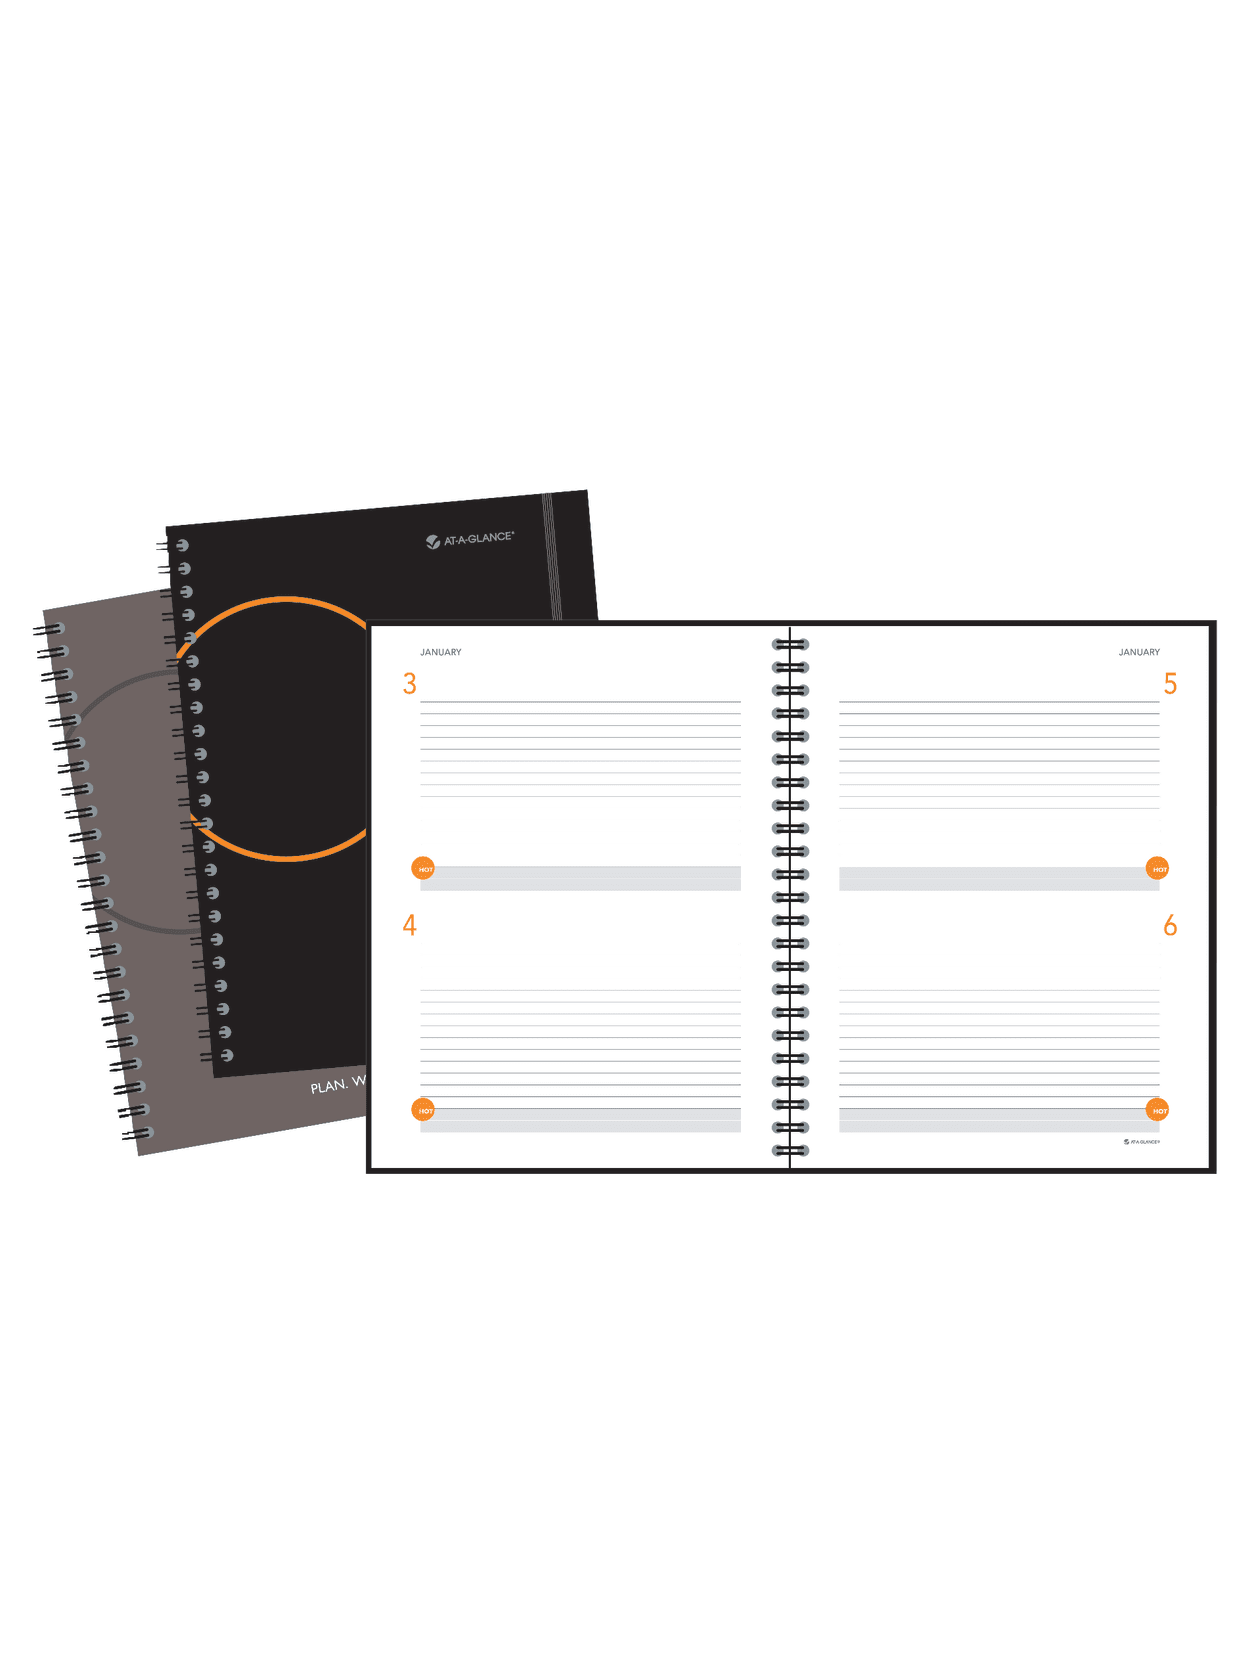 Details about   Weekly Monthly 2019 A5 Notebook Planner Spiral Time Memo Planning Management